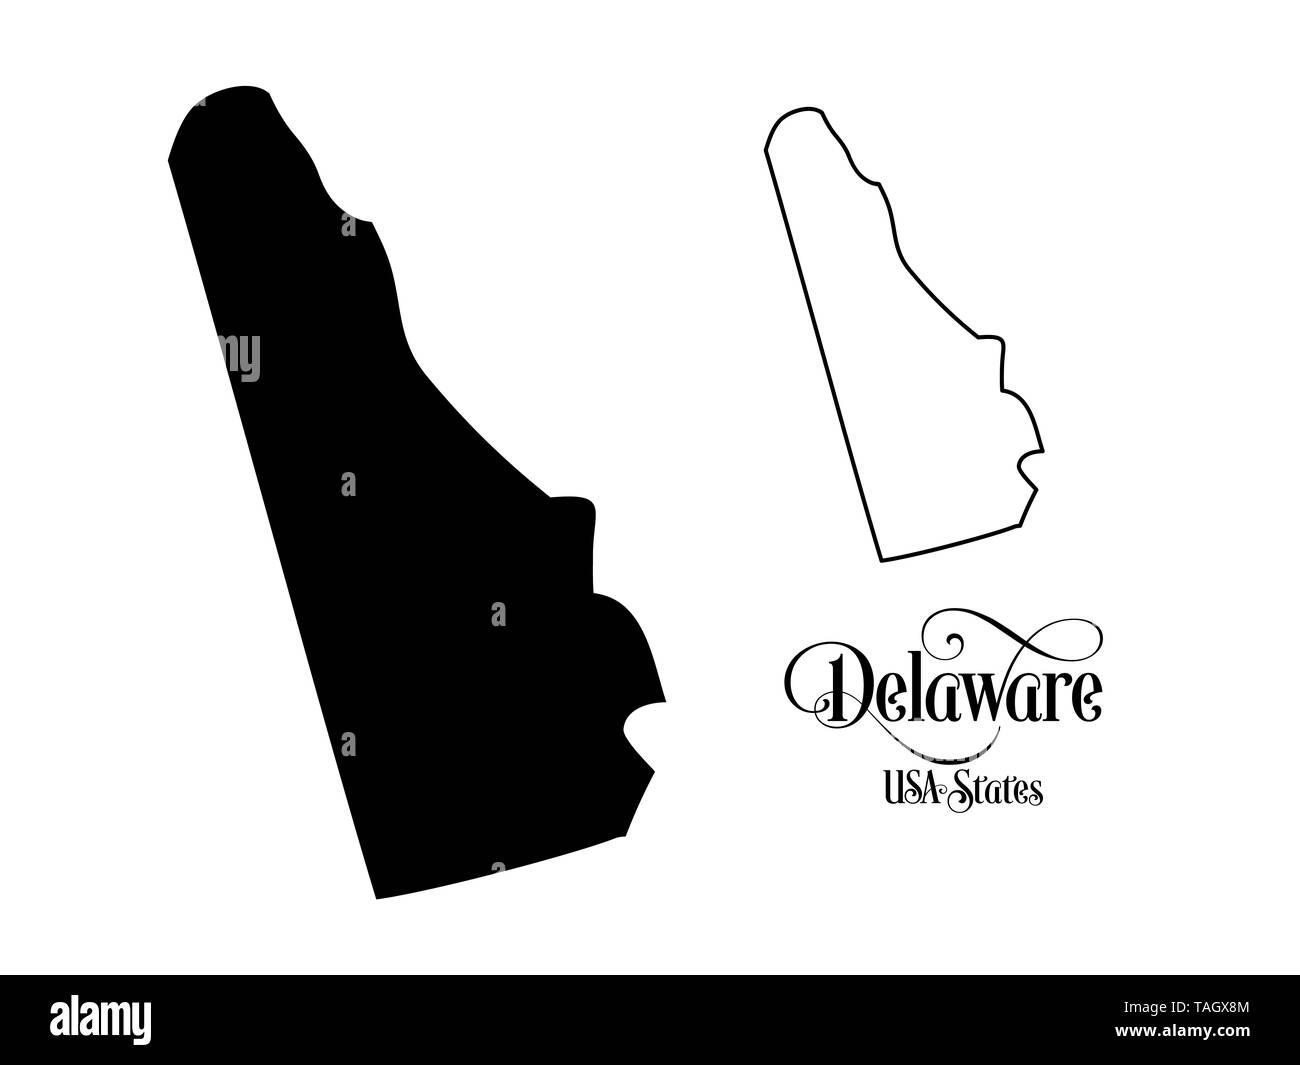 Map of The United States of America (USA) State of Delaware - Illustration on White Background. Stock Photo